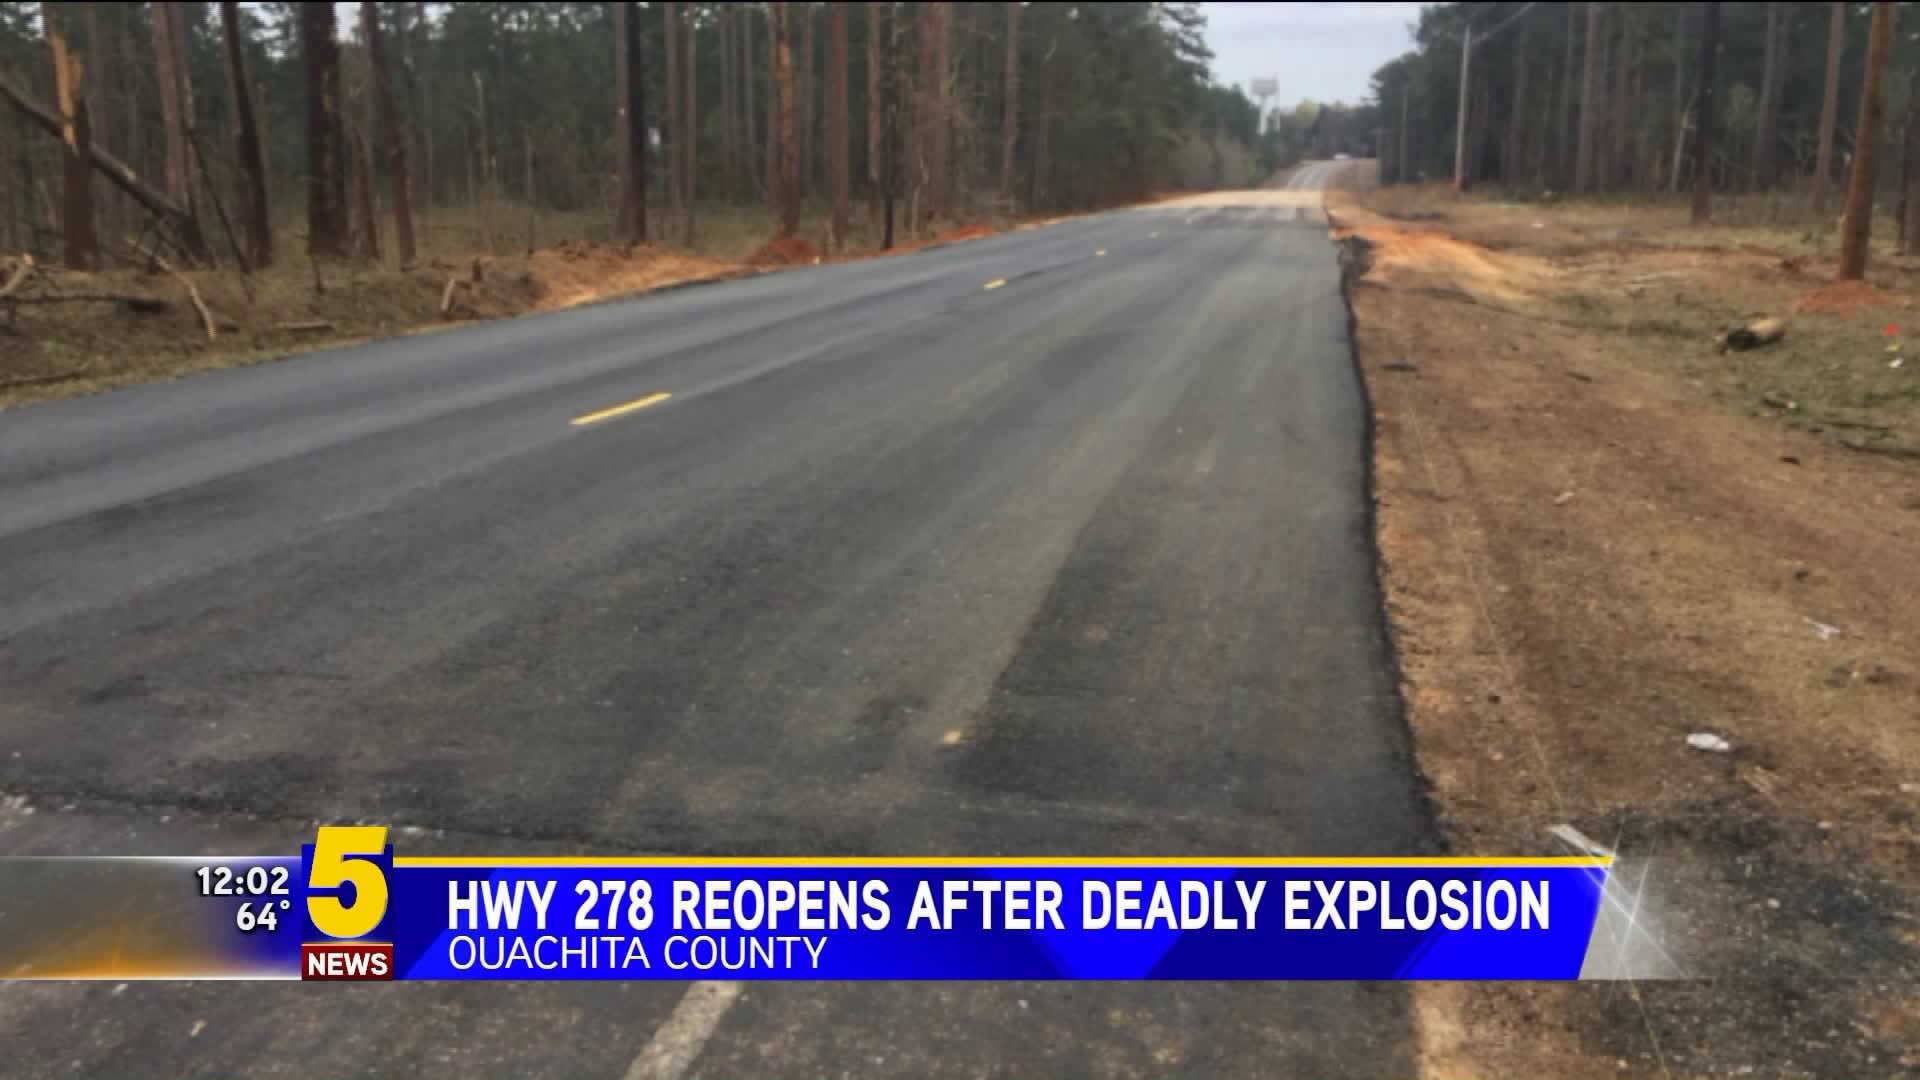 Hwy 278 Reopens After Deadly Explosion